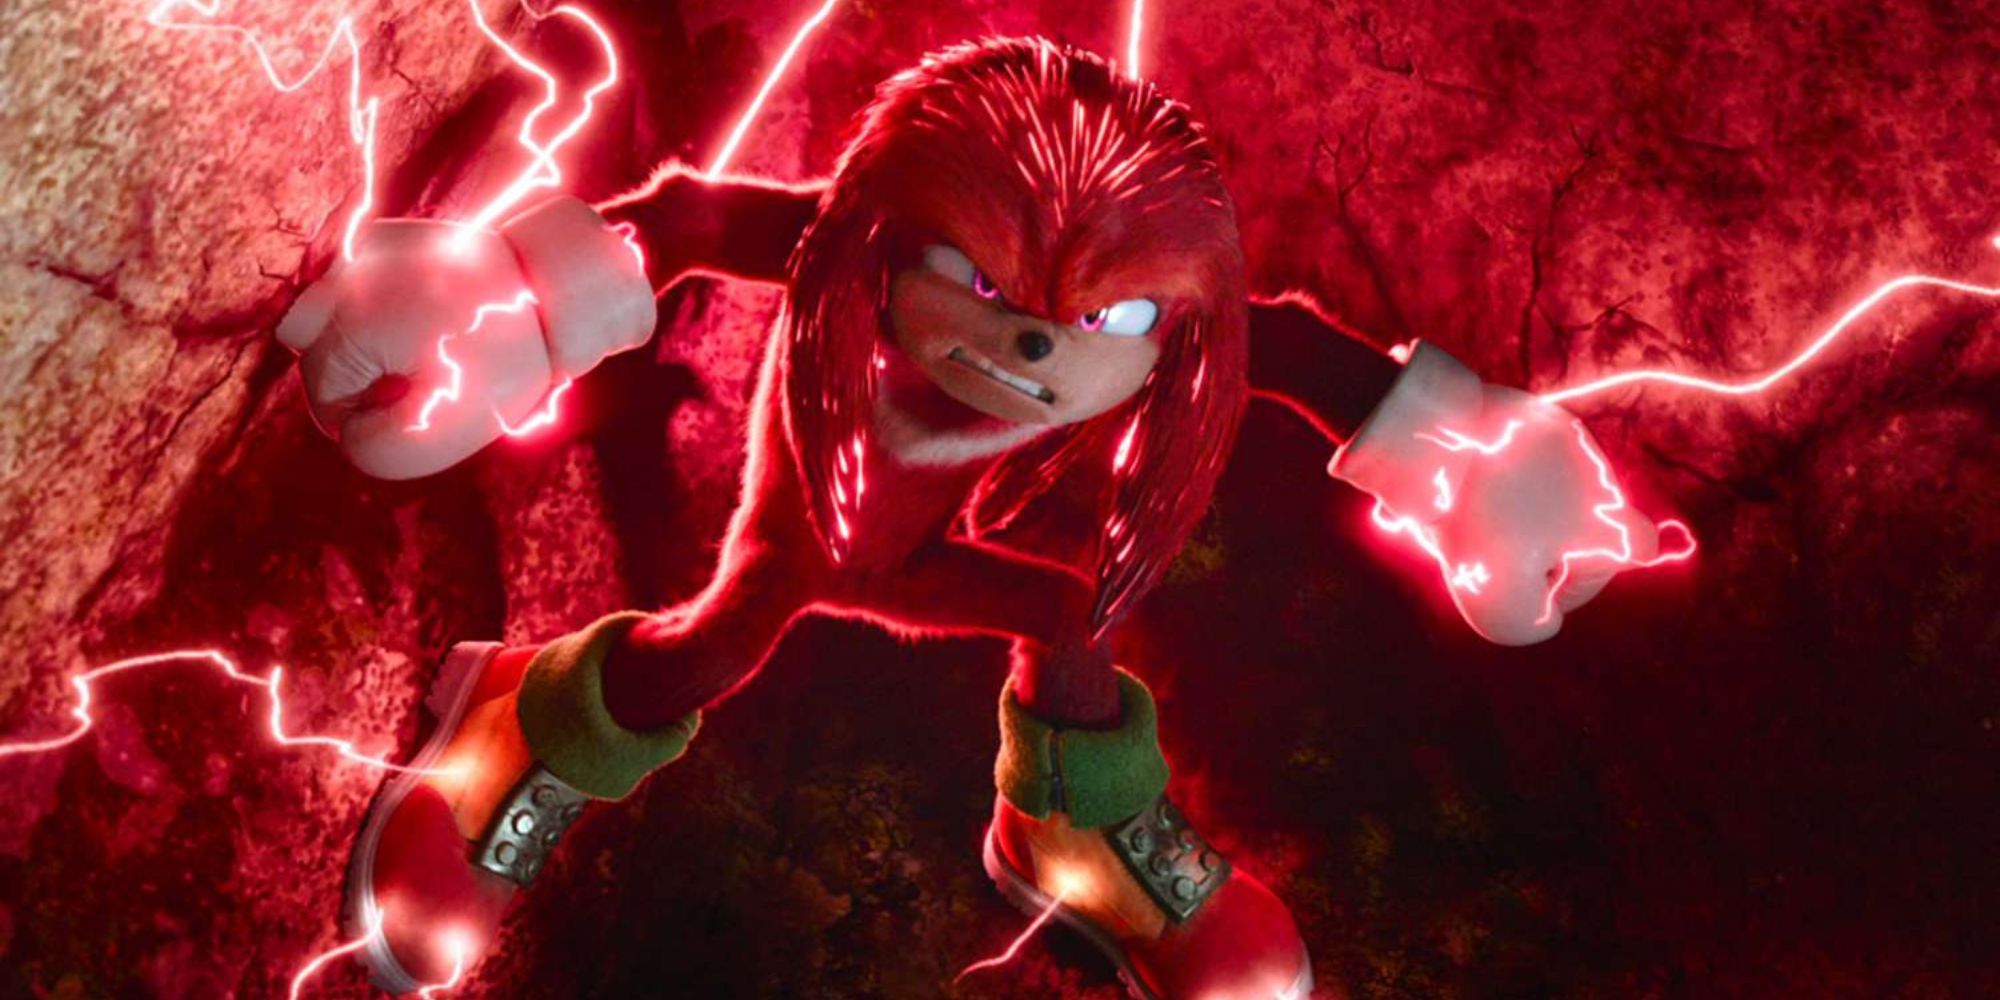 Knuckles electricity power